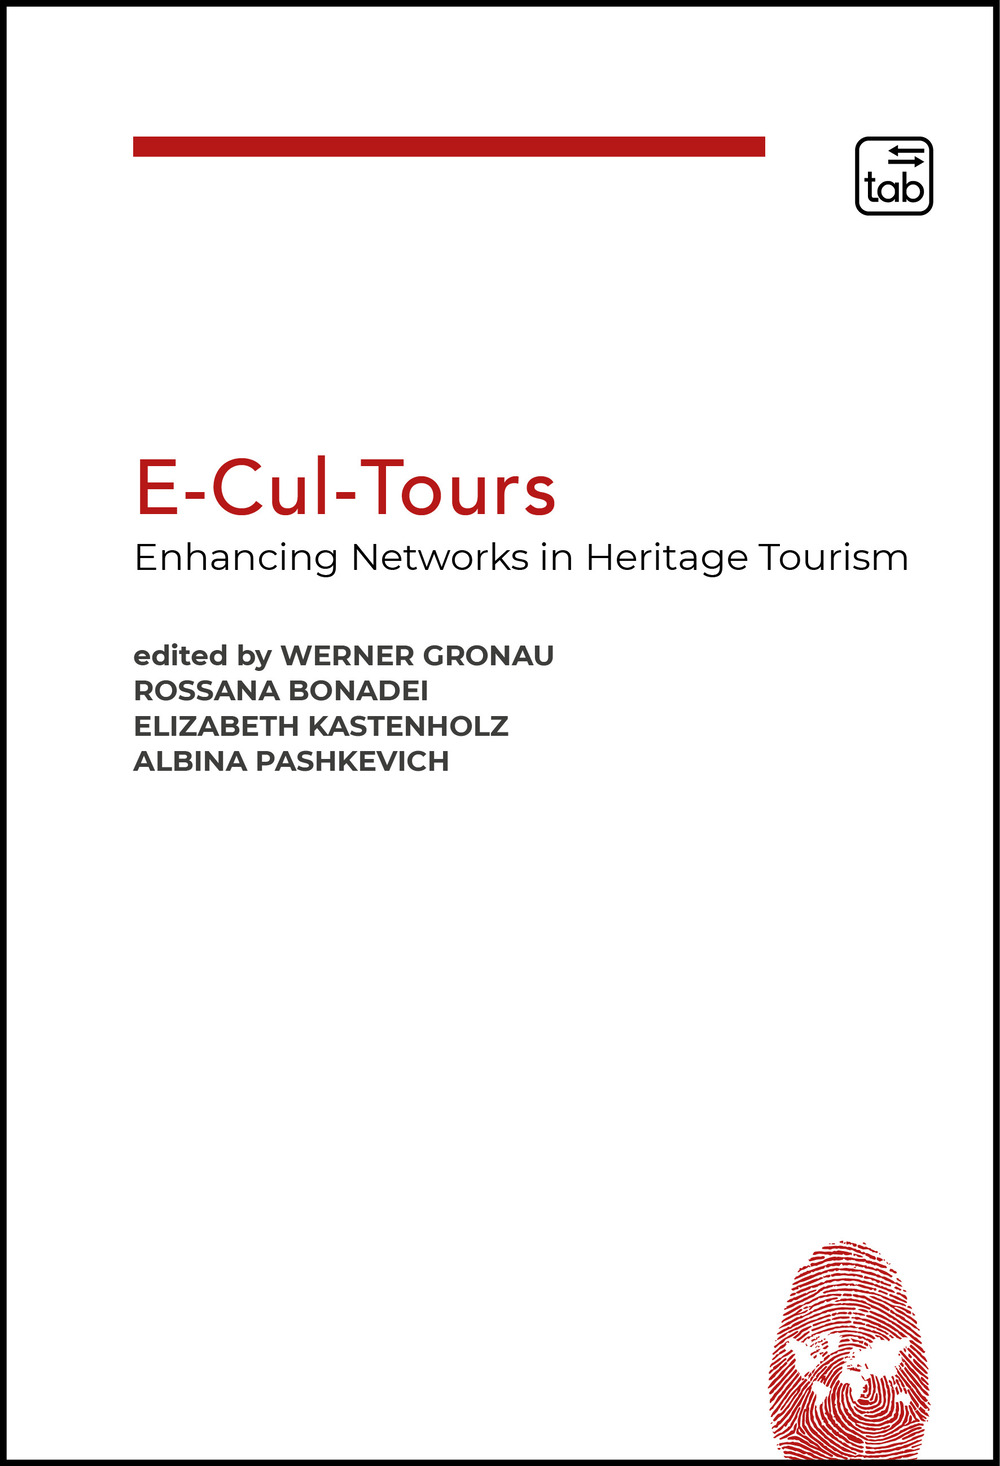 E-Cul-Tours. Enhancing Networks in heritage tourism